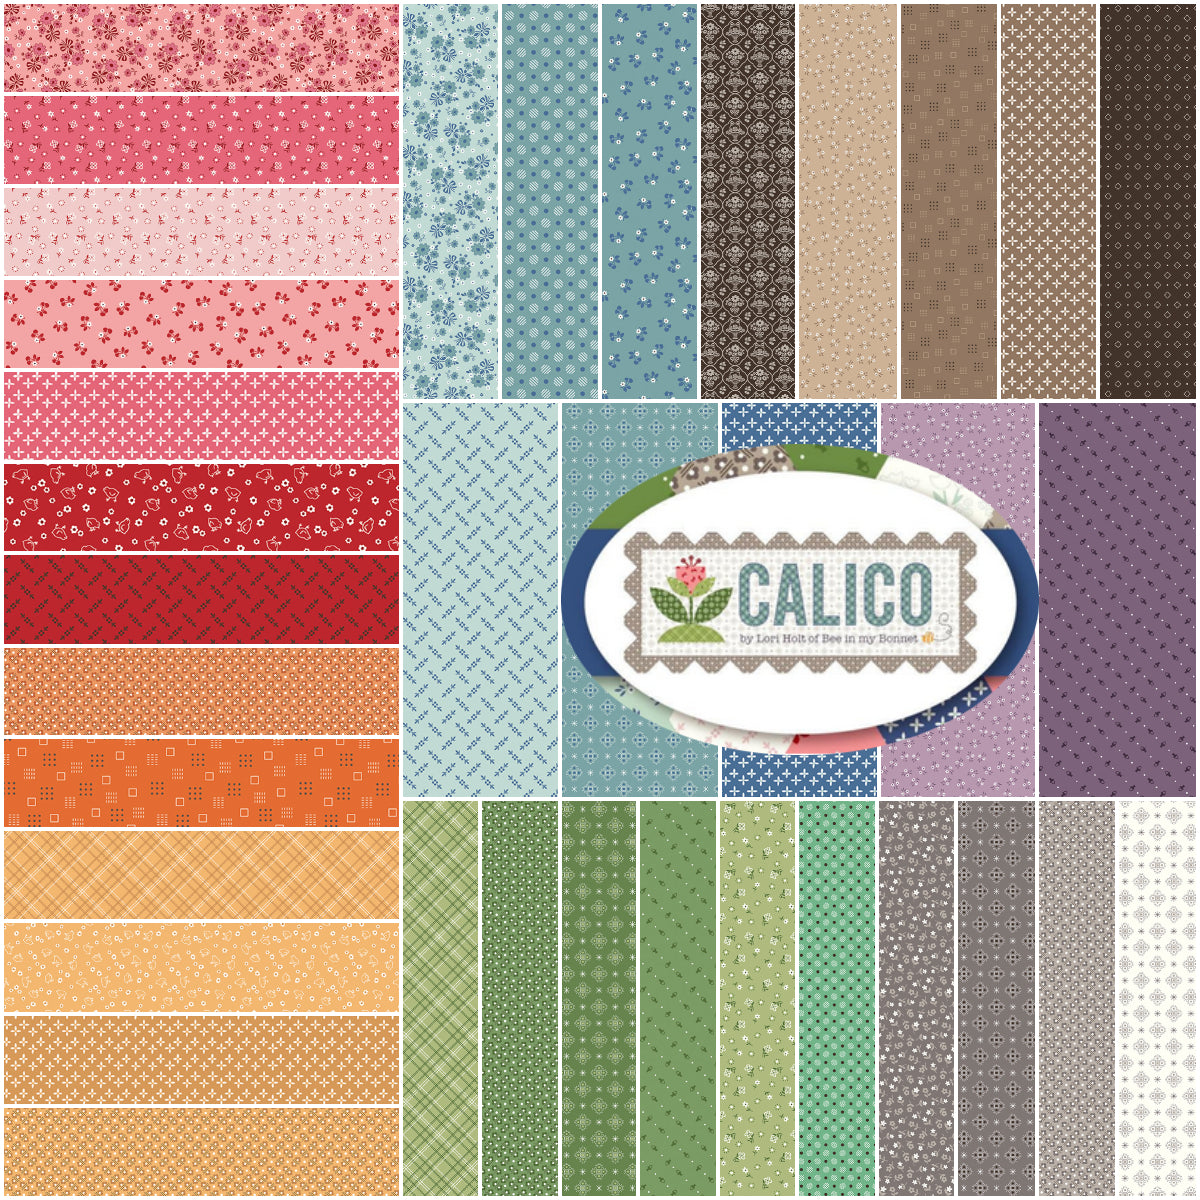 Calico by Lori Holt for Riley Blake Designs